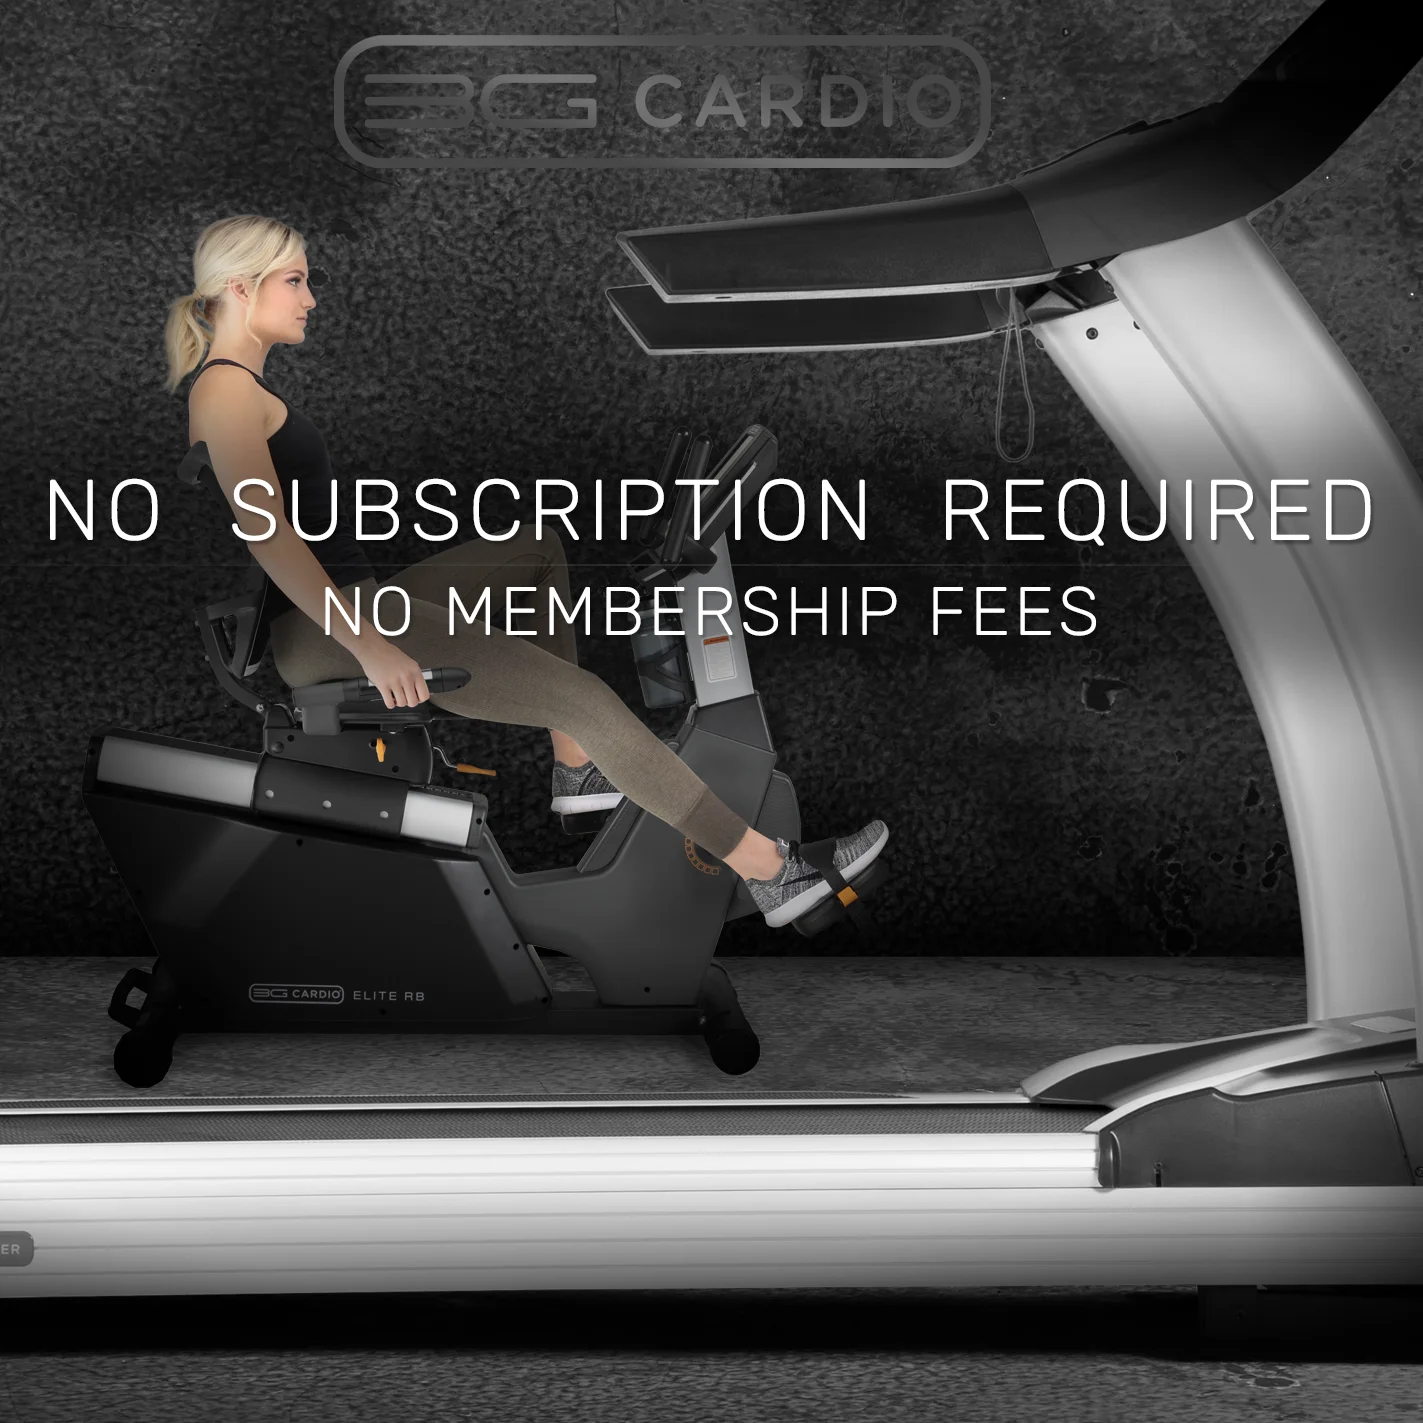 3G Cardio products have no subscription required and no membership fees